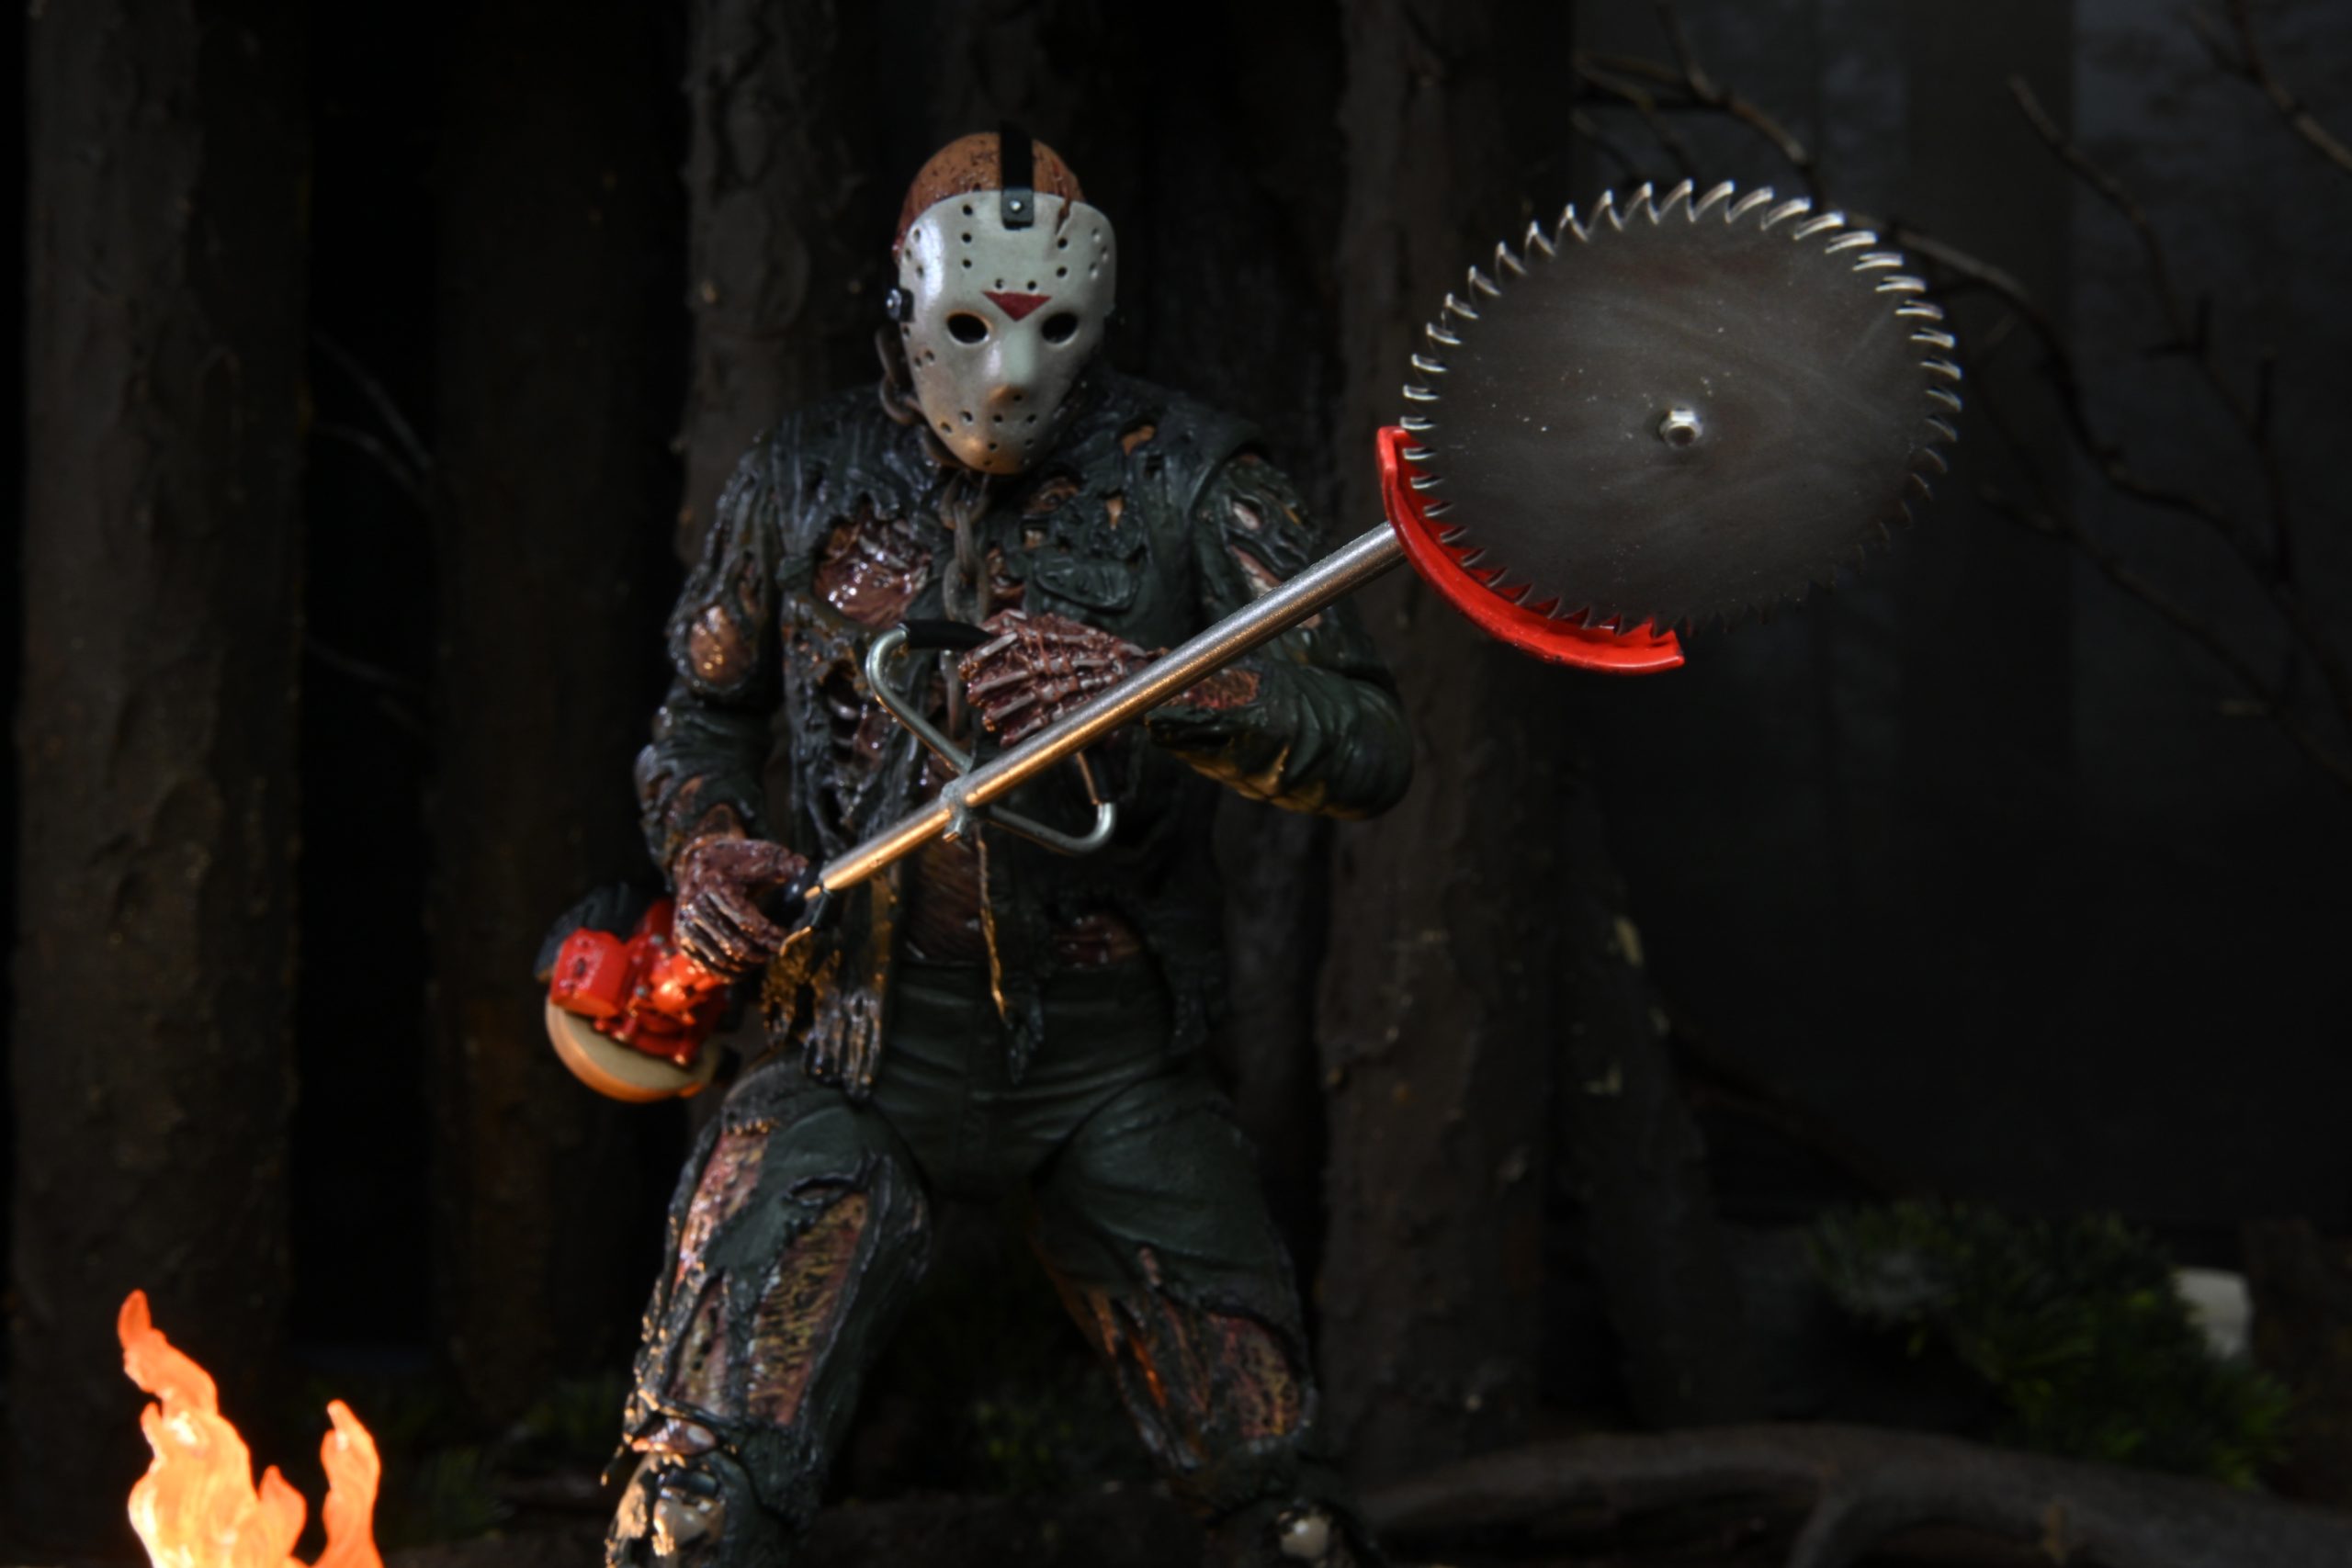 39702 for sale online NECA Jason Voorhees Friday The 13th 7 inch Action Figure